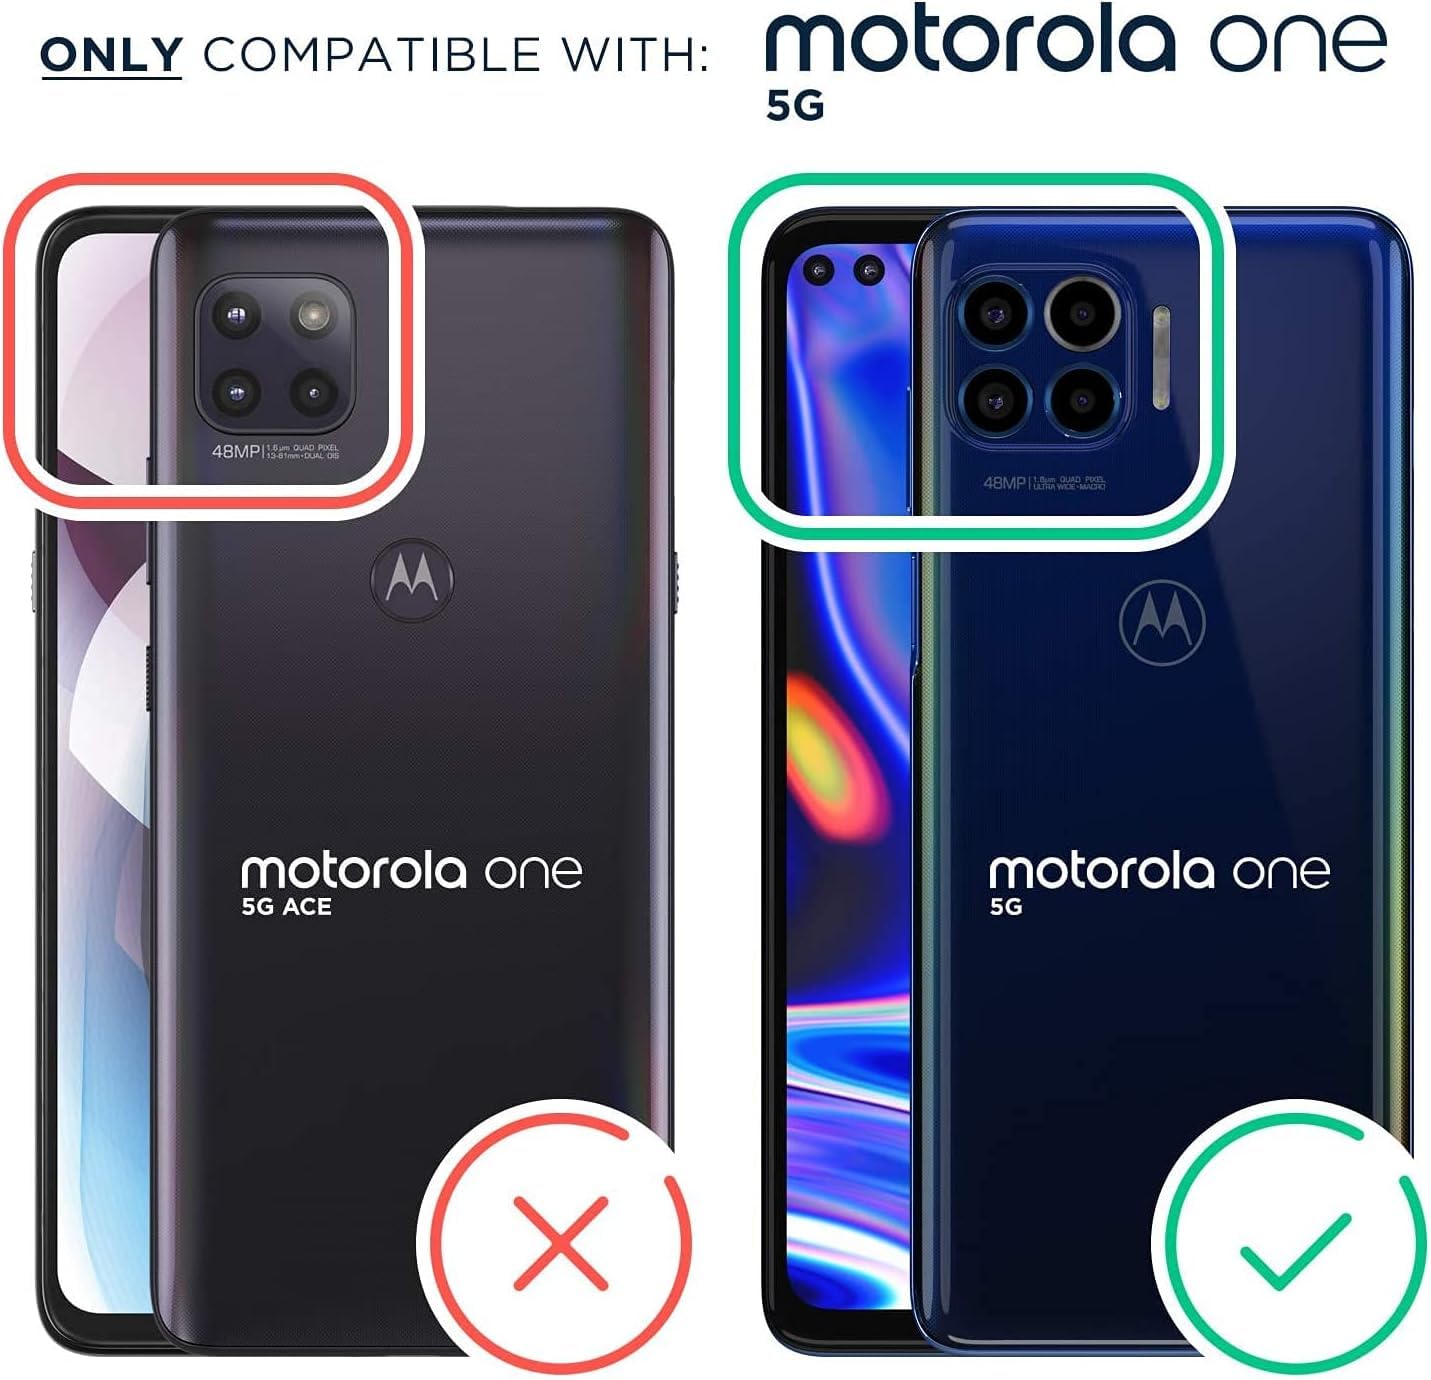 NZND Case for Motorola Moto One 5G / 5G UW/G 5G Plus with [Built-in Screen Protector], Full-Body Protection Bumper, Shockproof Protective, Impact Resist Case Cover (Black Marble)